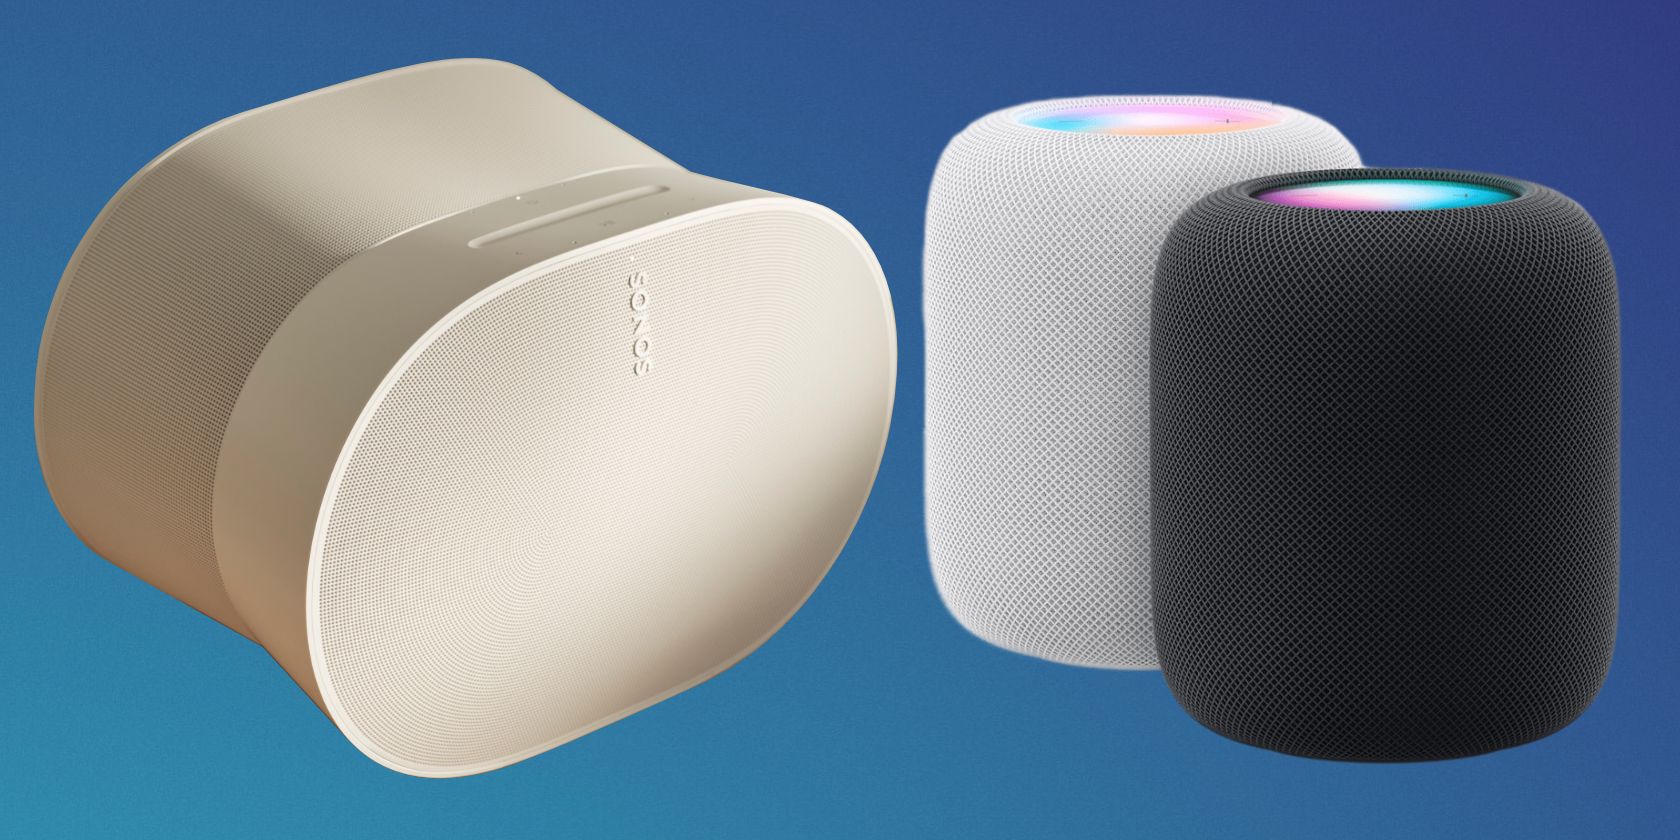 Sonos Era 300 vs. Apple HomePod: Which One Should You